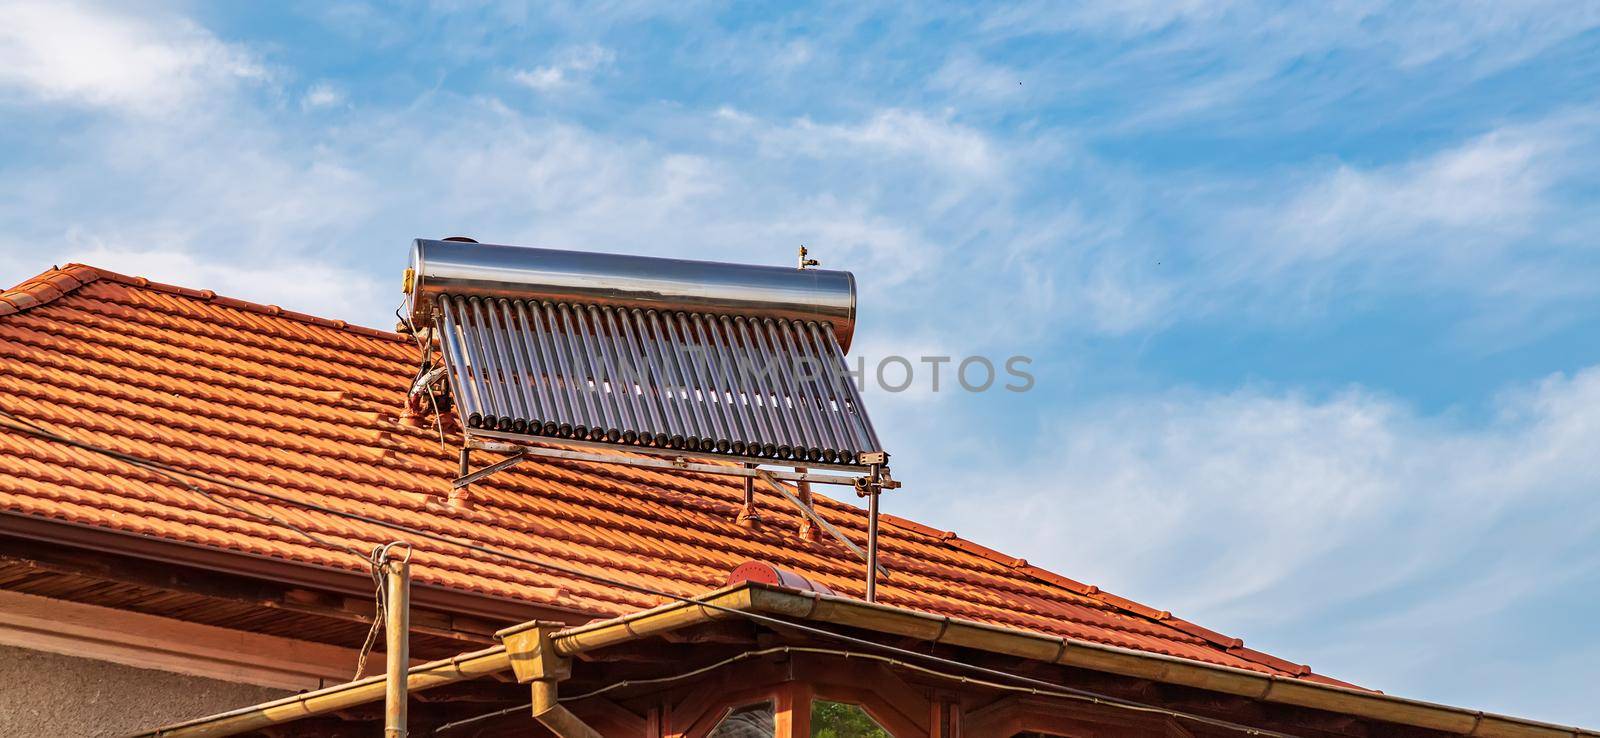 Solar water heater installed on tile roof of house for eco heating of water. Large water tank. Horizontal photo. by EdVal